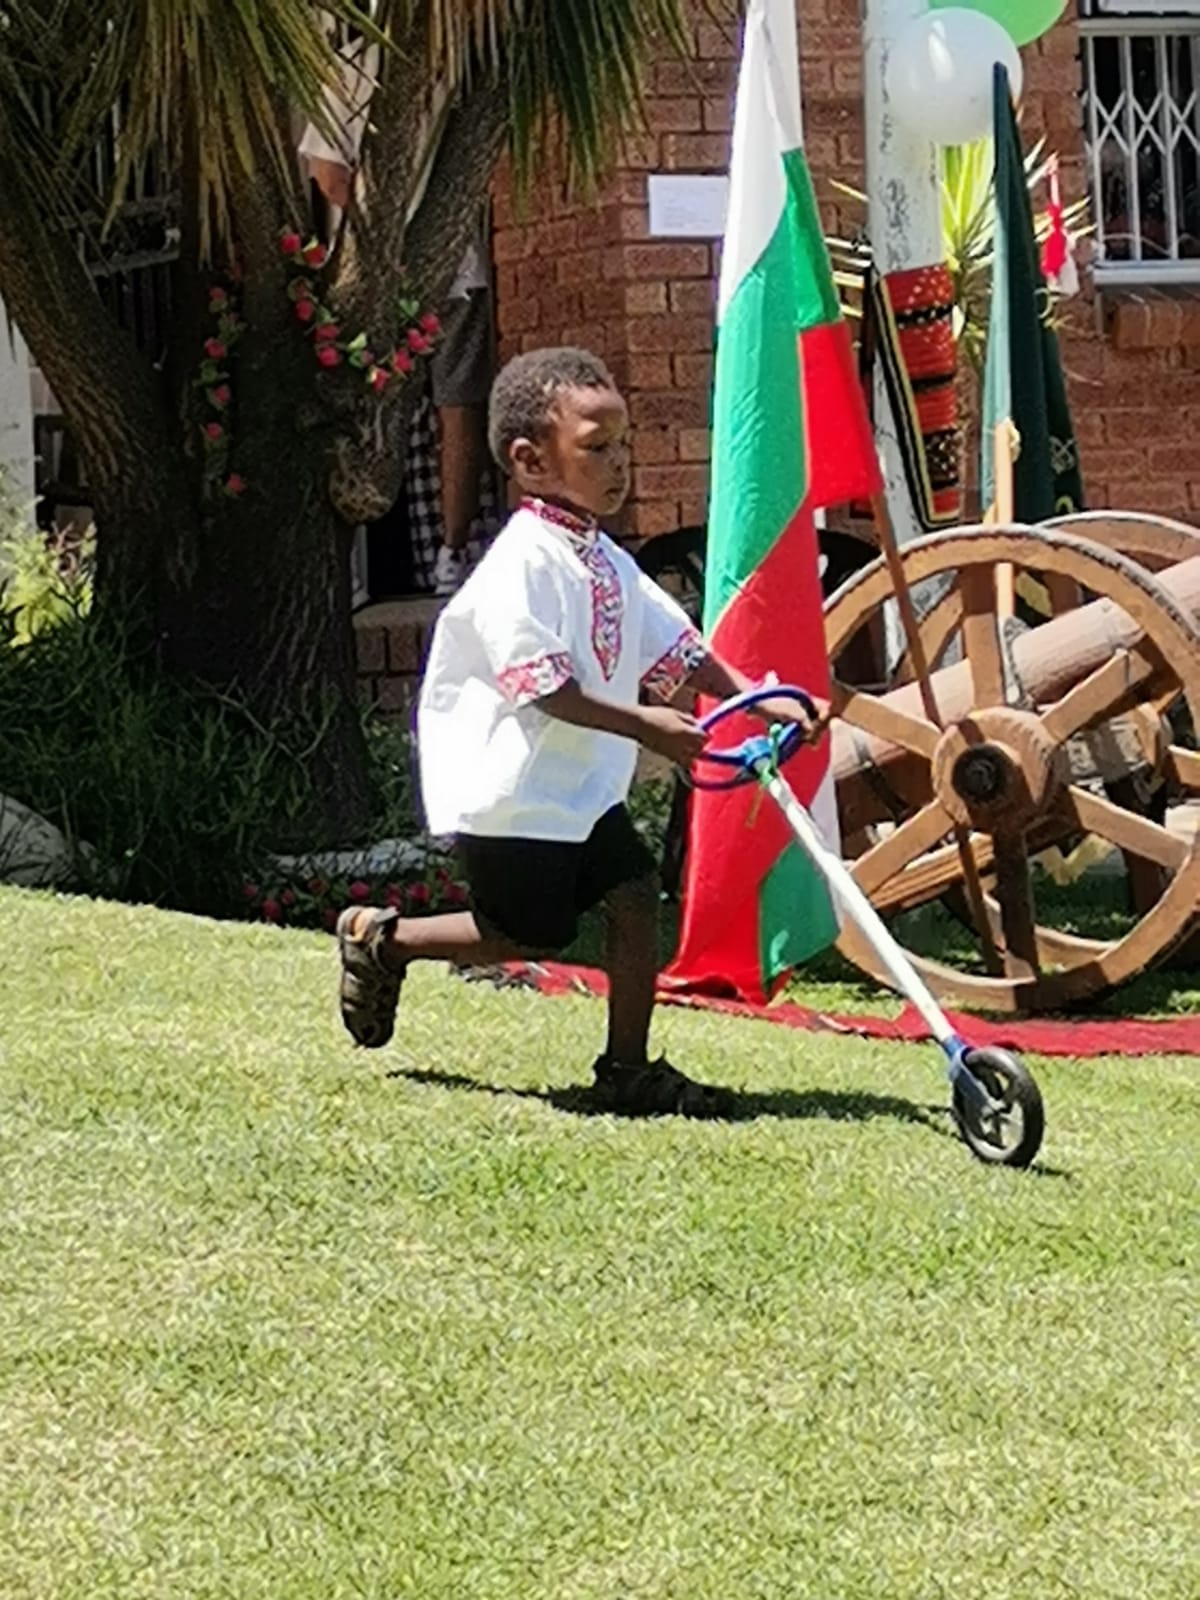 Celebration of the National Day of the Republic of Bulgaria - the 3rd of March, at the Bulgarian Cultural Club in Midrand